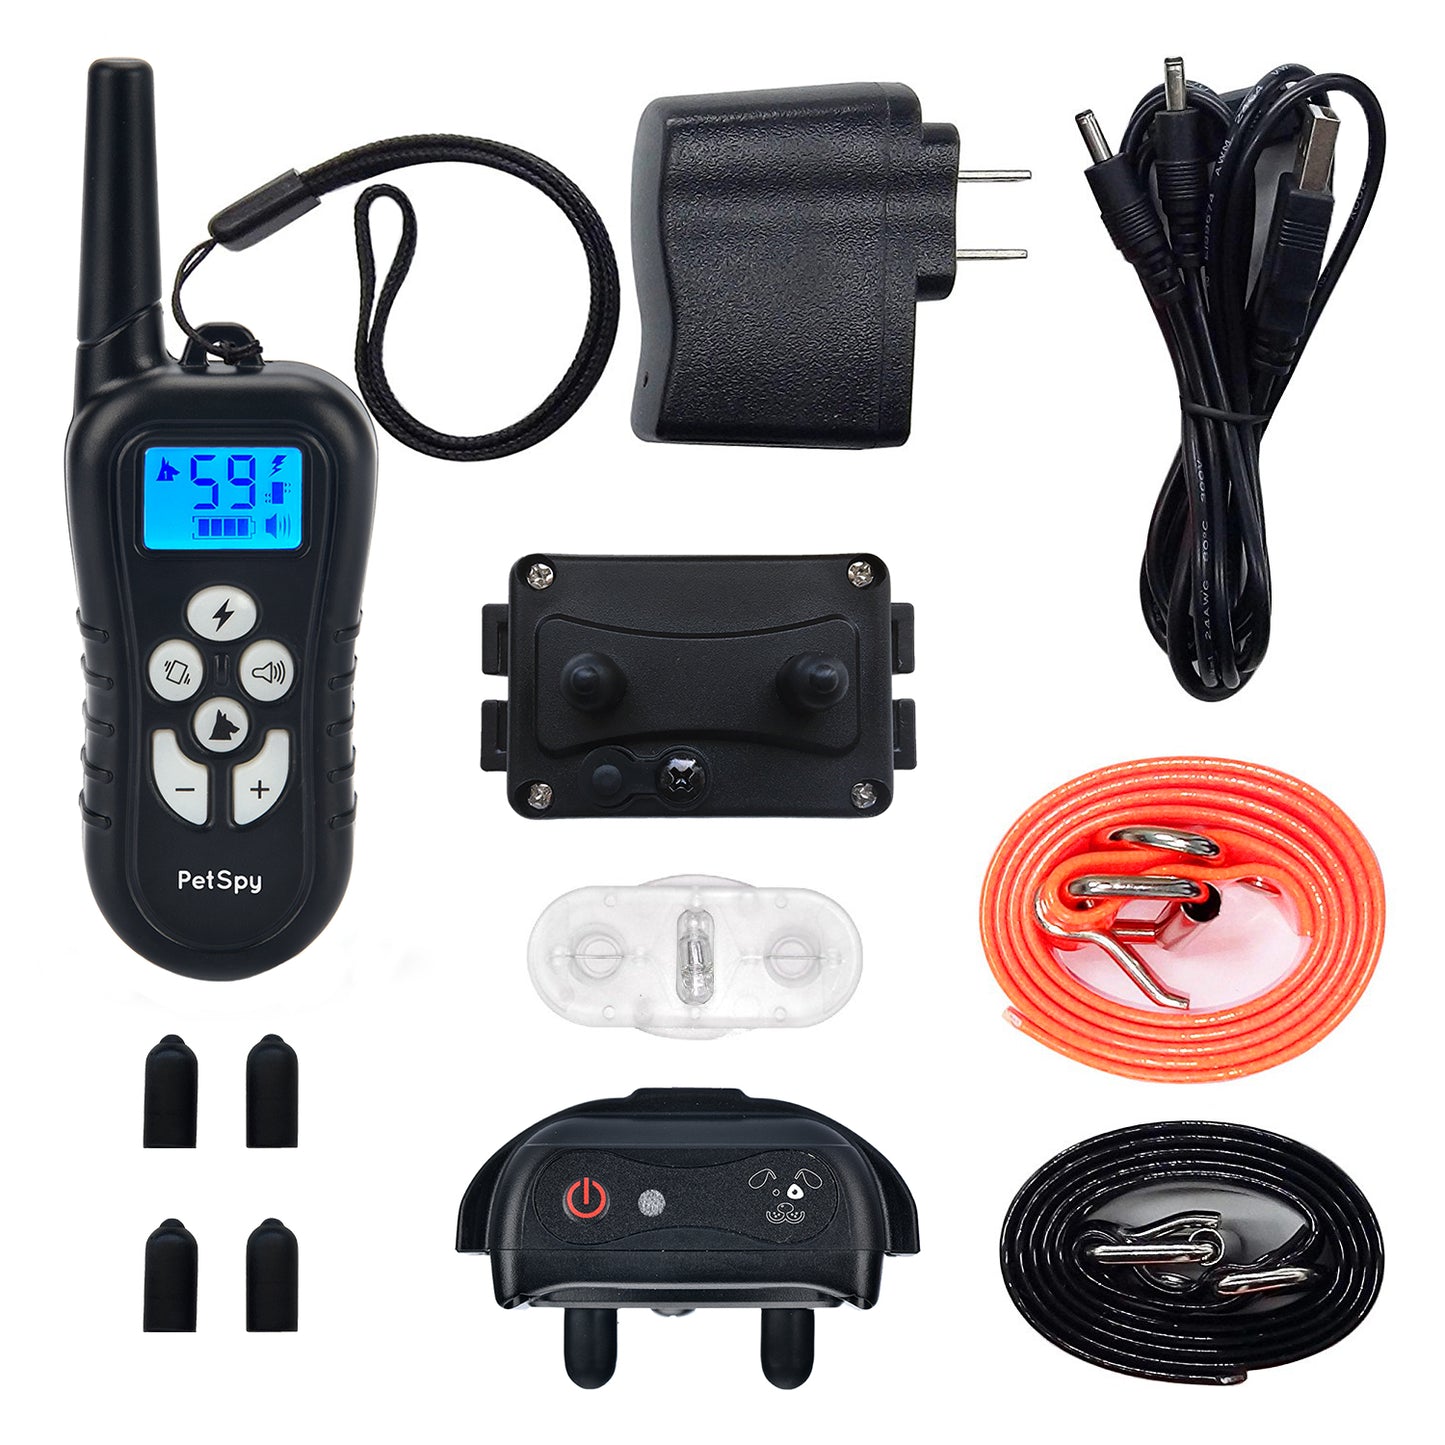  product included: Remote Transmitter, Collar Receivers, Adjustable TPU Straps, Dual USB Charger, Test Light and User Guide